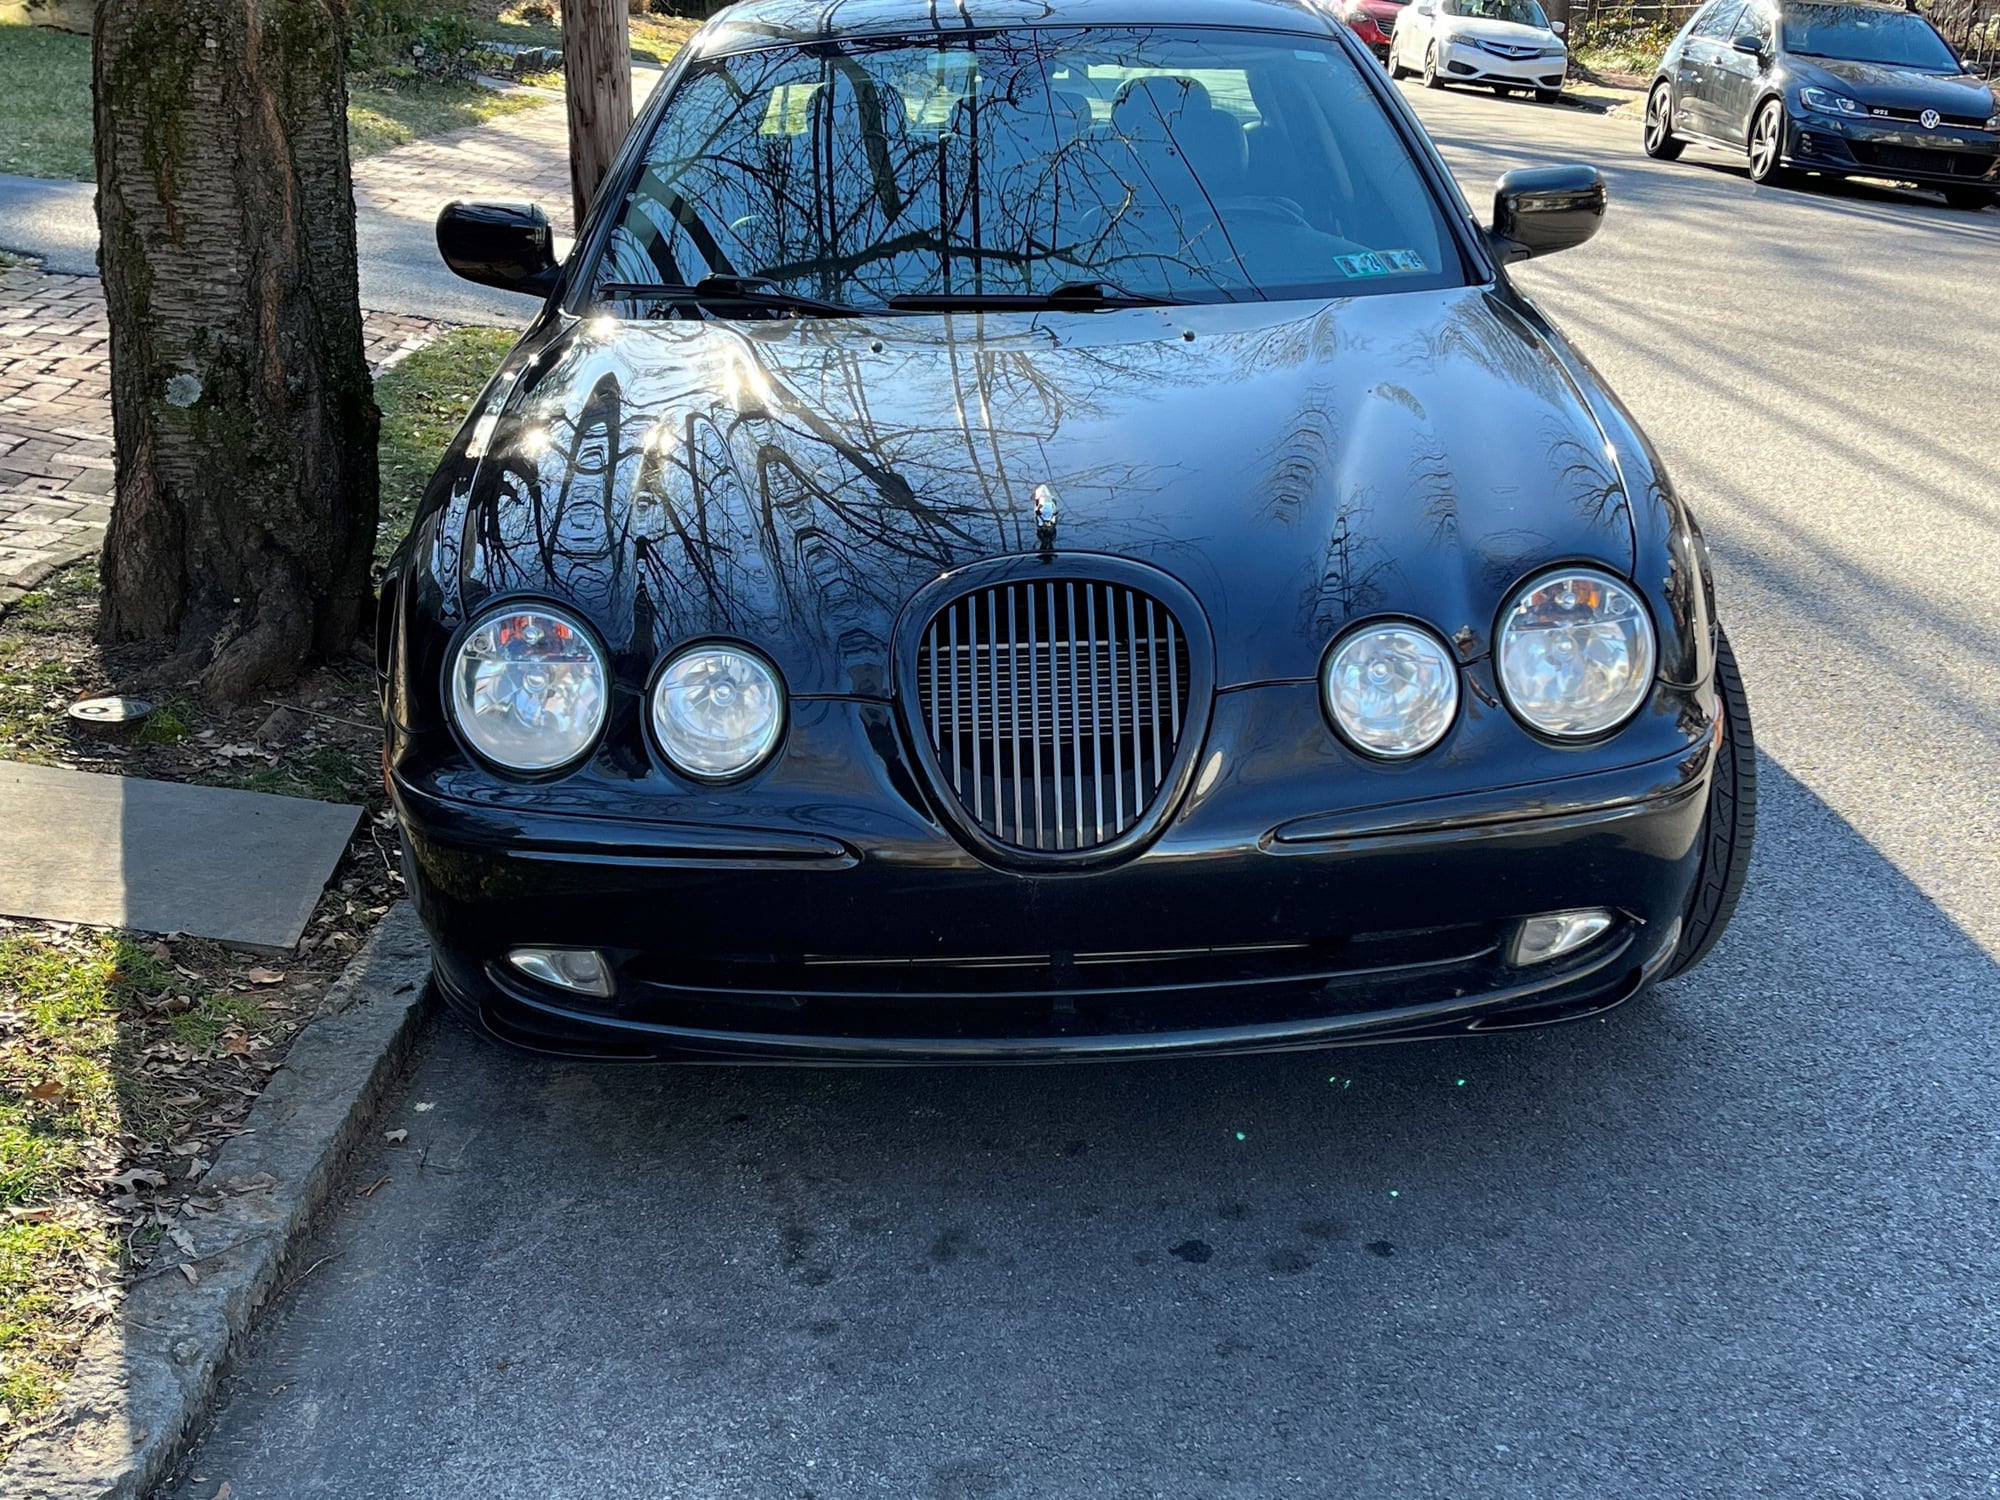 2002 Jaguar S-Type - 2002 Jaguar S-Type in Very Good Condition - $ 4,000 - Used - VIN SAJDA03P02GM36141 - 96,654 Miles - 8 cyl - 2WD - Sedan - Black - West Chester, PA 19380, United States